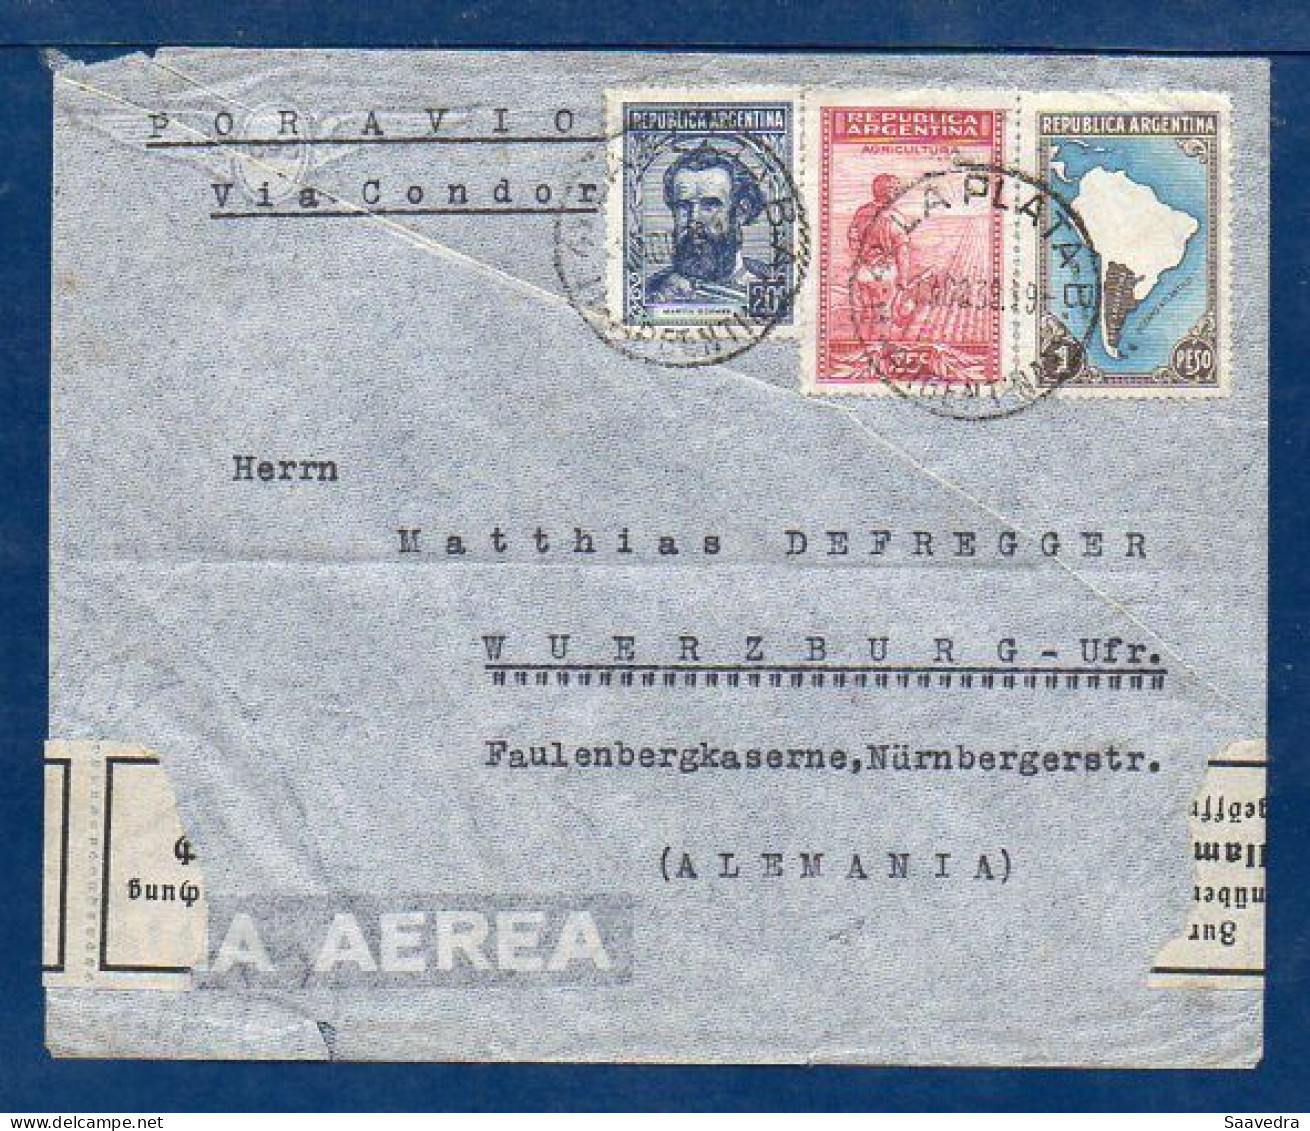 Argentina To Germany, 1939, Last Flight To Europe Via Condor, Flight L-480, Currency Censor Tape, SEE DESCRIPTION  (040) - Covers & Documents